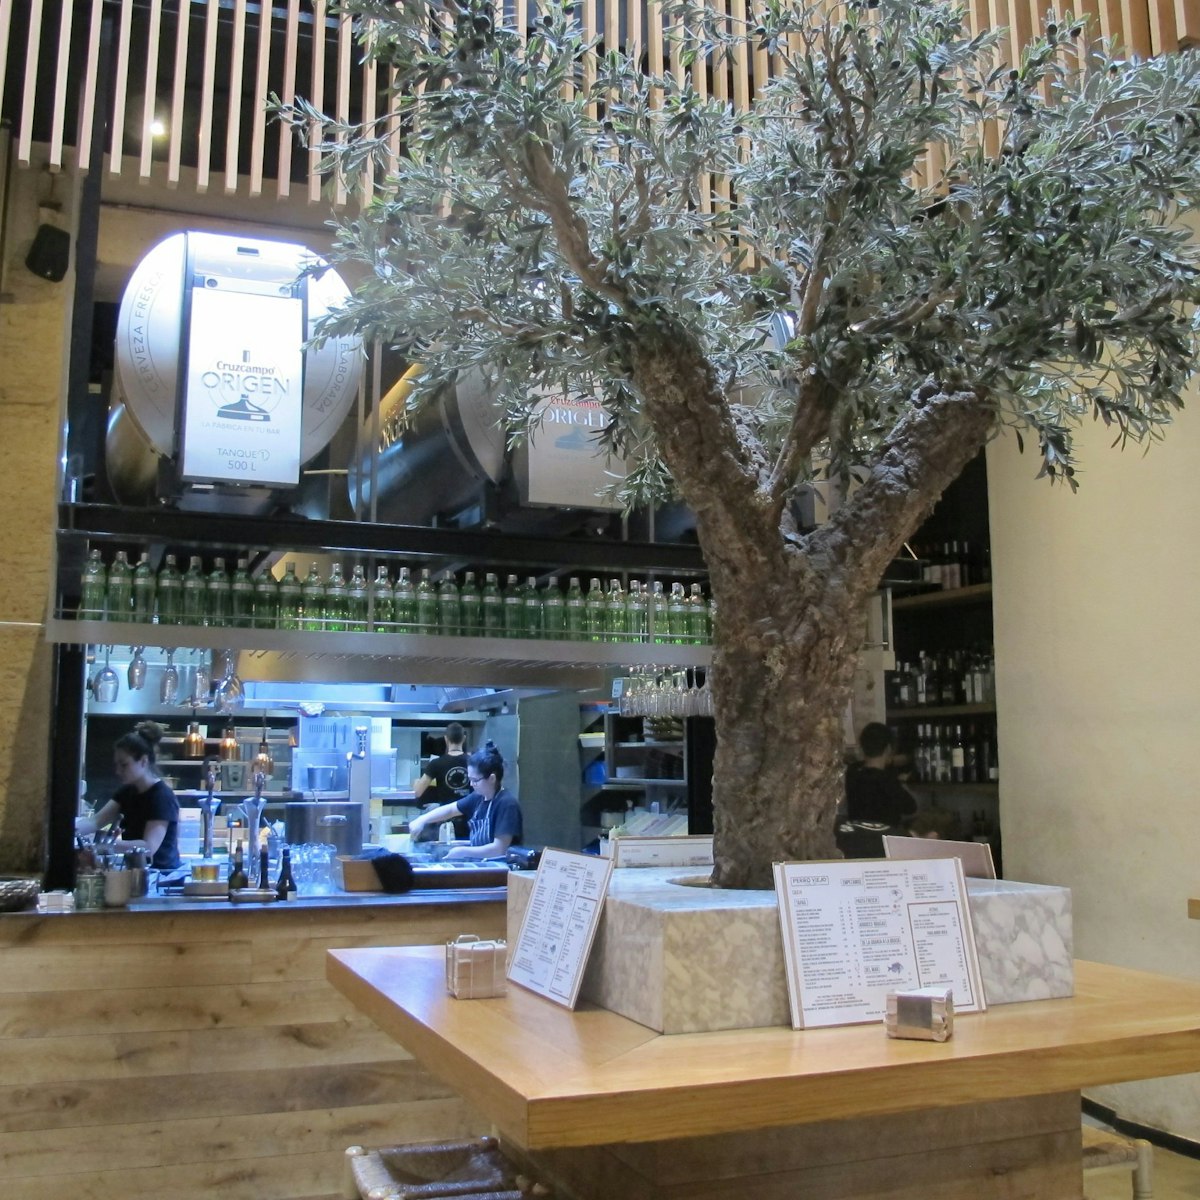 Restaurant interior - olive tree with table and open kitchen, Perro Viejo.